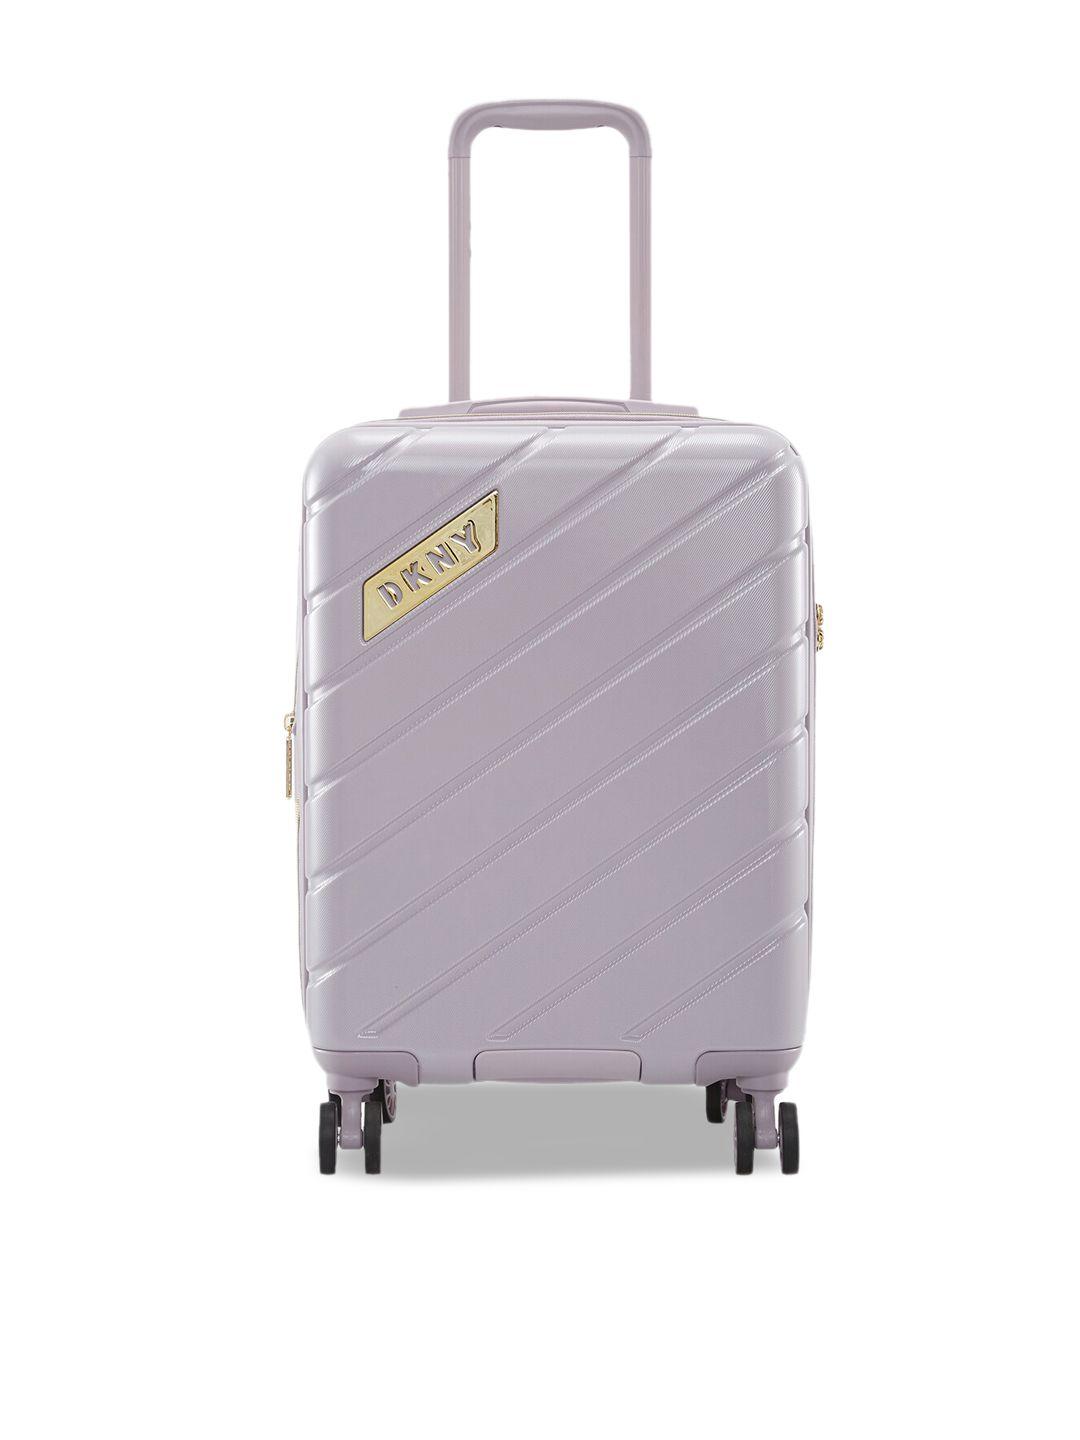 dkny bias abs material hard 20" cabin size trolley